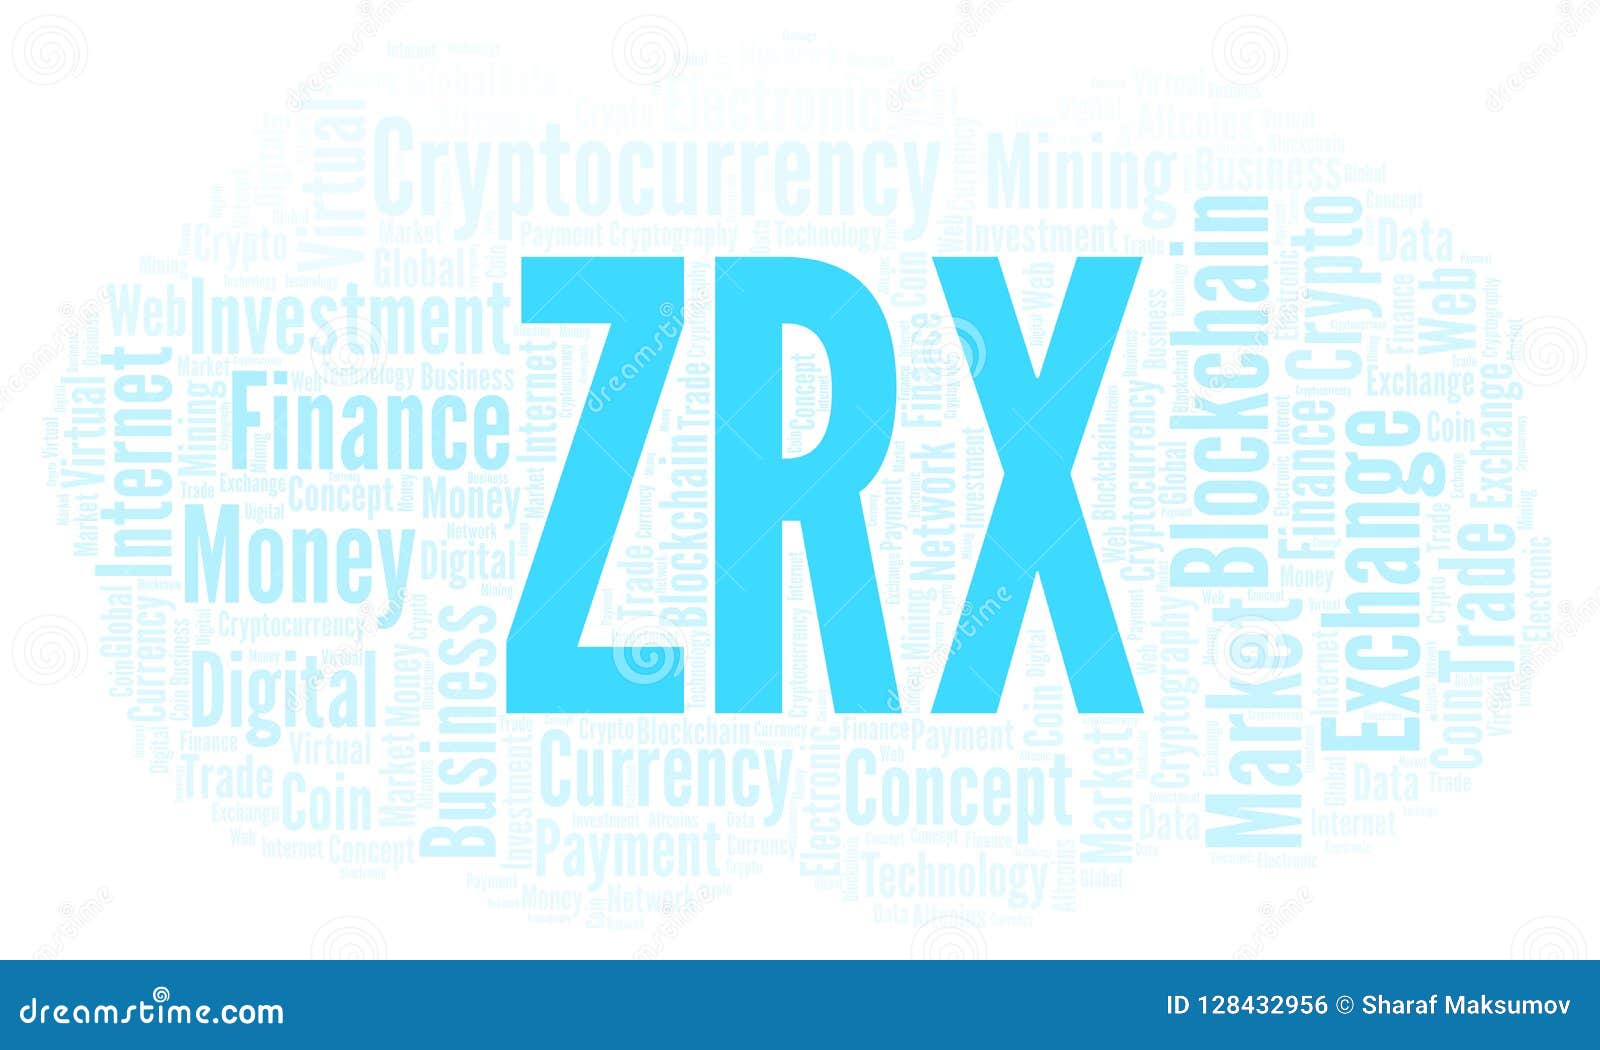 ZRX Or 0x Cryptocurrency Coin Word Cloud. Stock ...